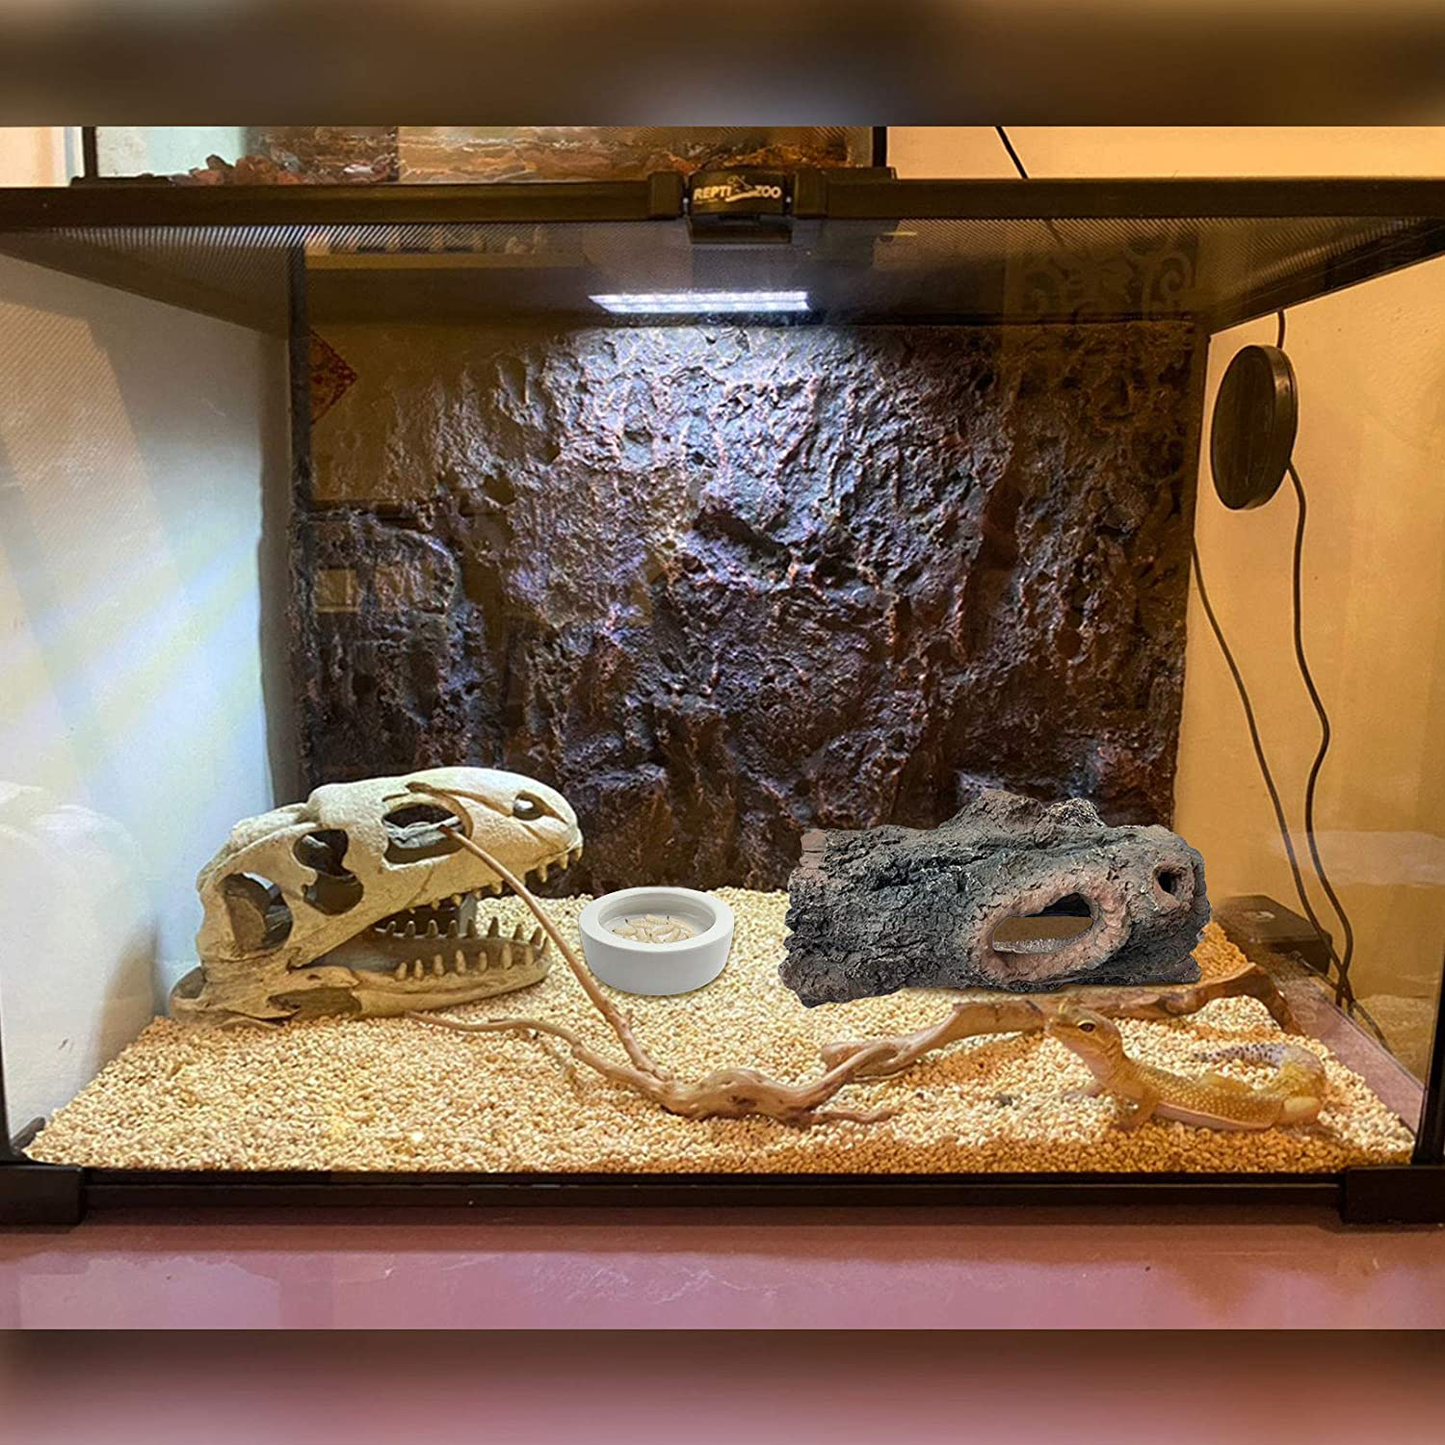 PINVNBY Large Reptile Hideout Cave Lizard Resin Hollow Tree Trunk Habitat Decoration Bark Bend Tank Decor Decaying Driftwood Hut Ornament Terrarium Accessories for Chameleon,Gecko and Hermit Crabs Animals & Pet Supplies > Pet Supplies > Reptile & Amphibian Supplies > Reptile & Amphibian Habitats PINVNBY   